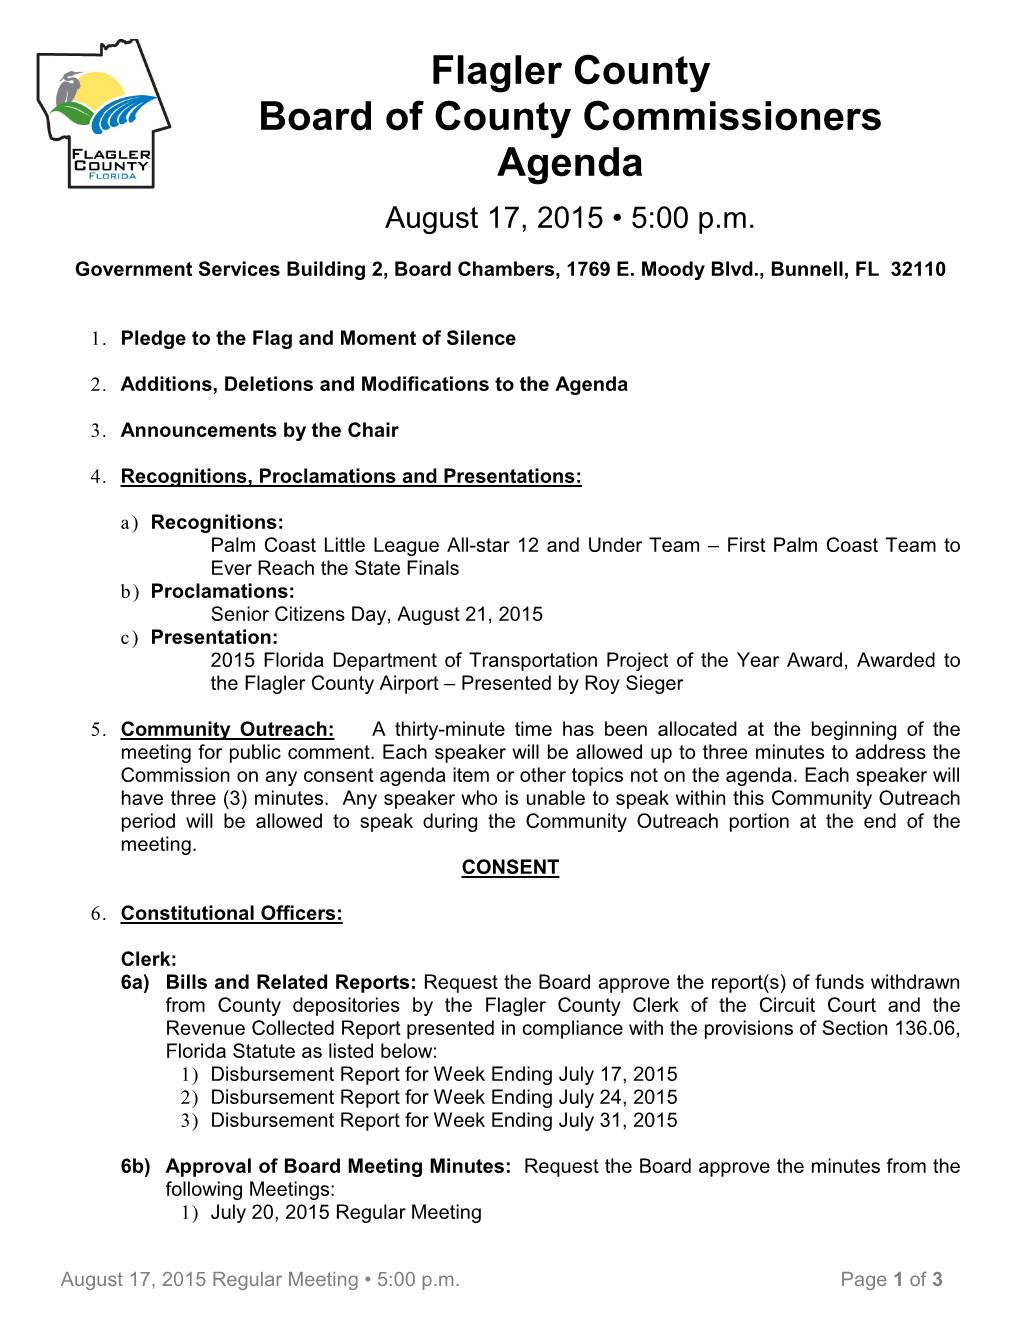 Flagler County Board of County Commissioners Agenda